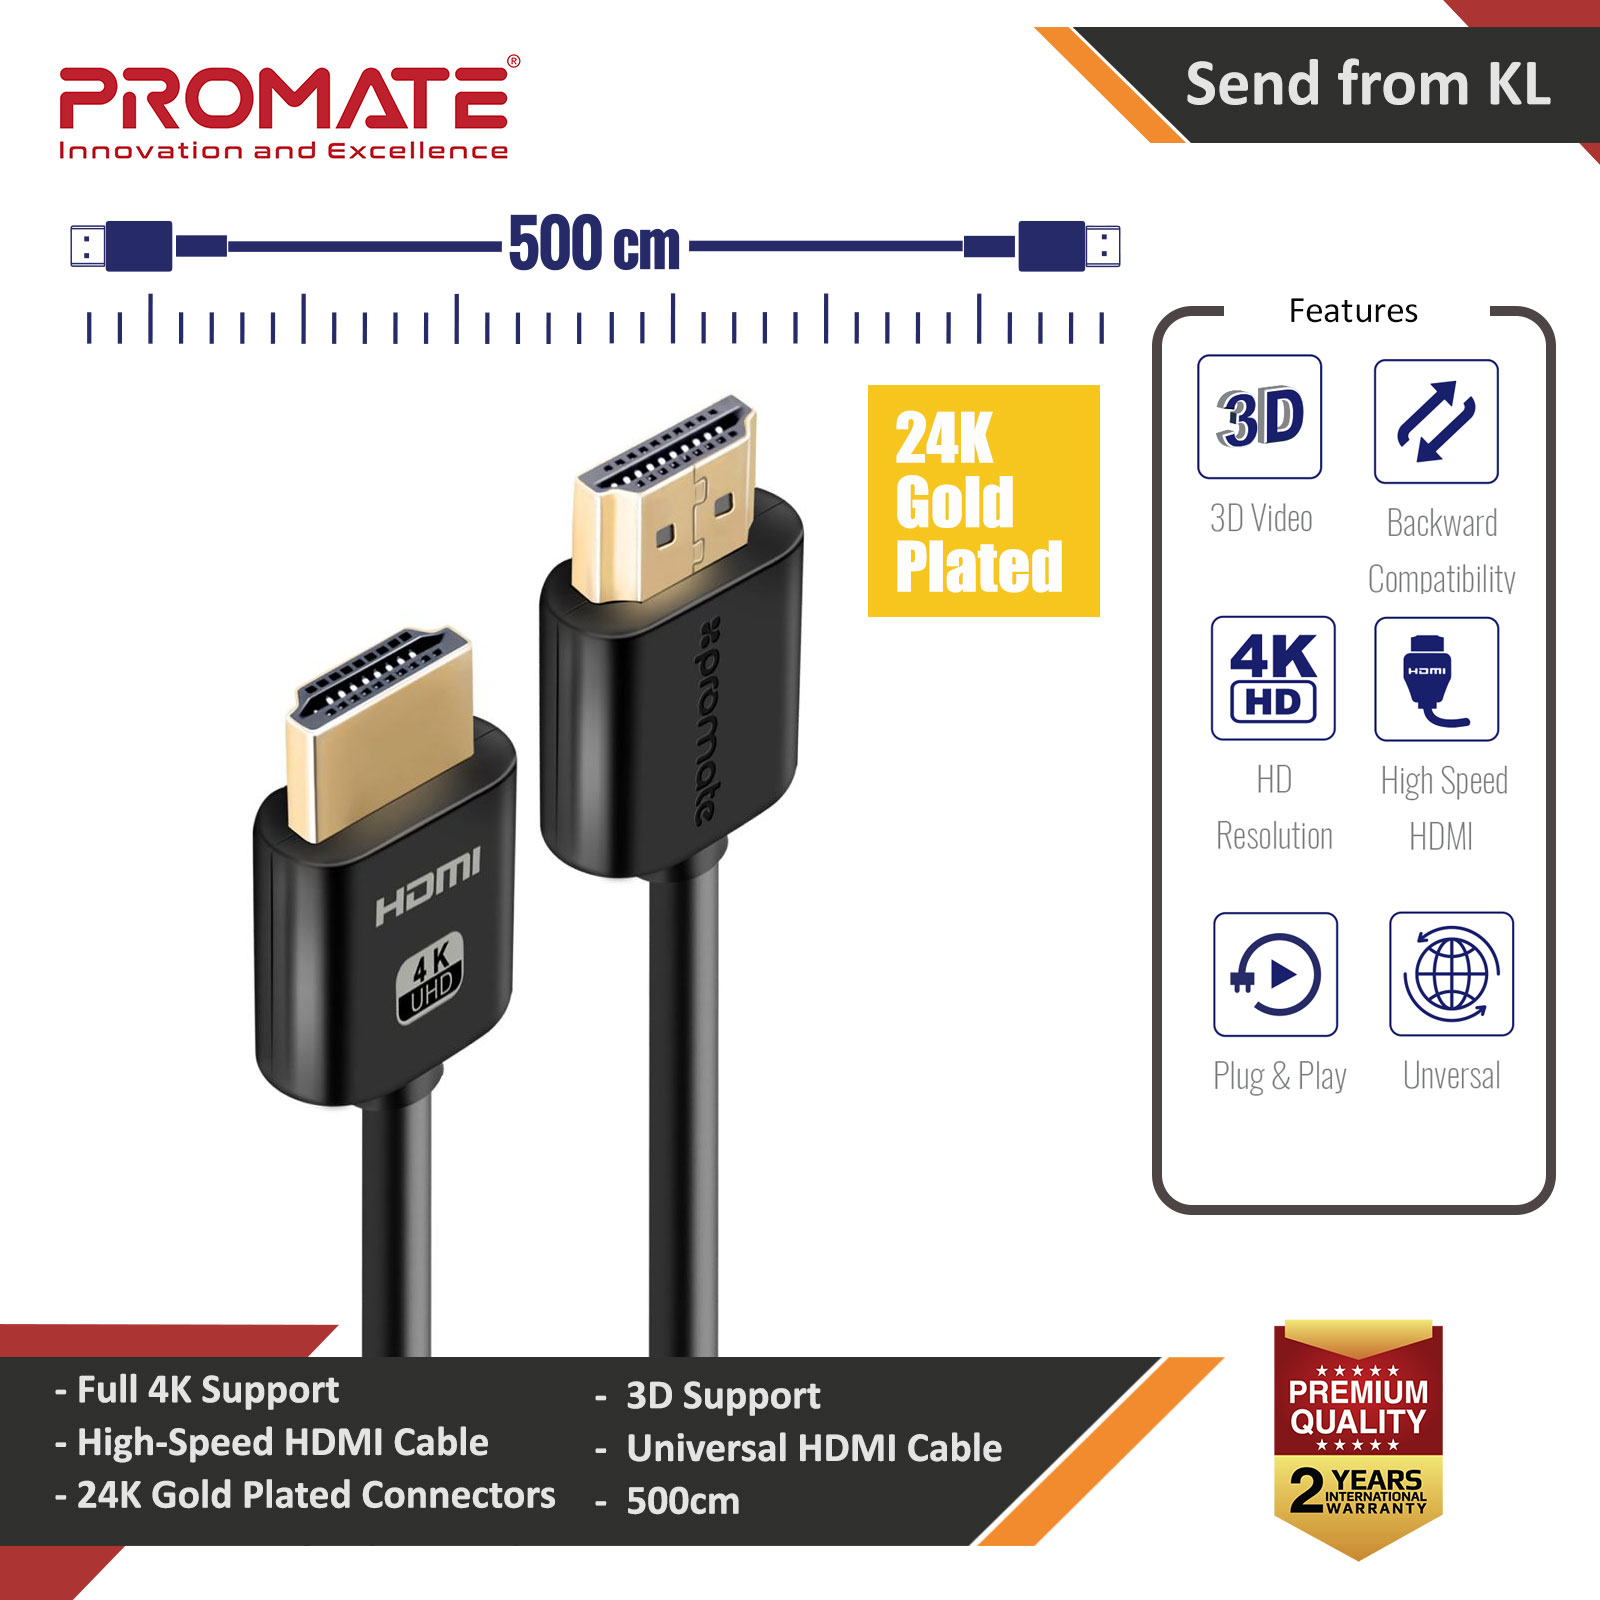 Picture of Promate 4K HDMI Cable High-Speed 5 Meter HDMI Cable with 24K Gold Plated Connector and Ethernet 3D Video Support for HDTV Projectors Computers LED TV and Game consoles 500cm ProLink4K2-500 Red Design- Red Design Cases, Red Design Covers, iPad Cases and a wide selection of Red Design Accessories in Malaysia, Sabah, Sarawak and Singapore 